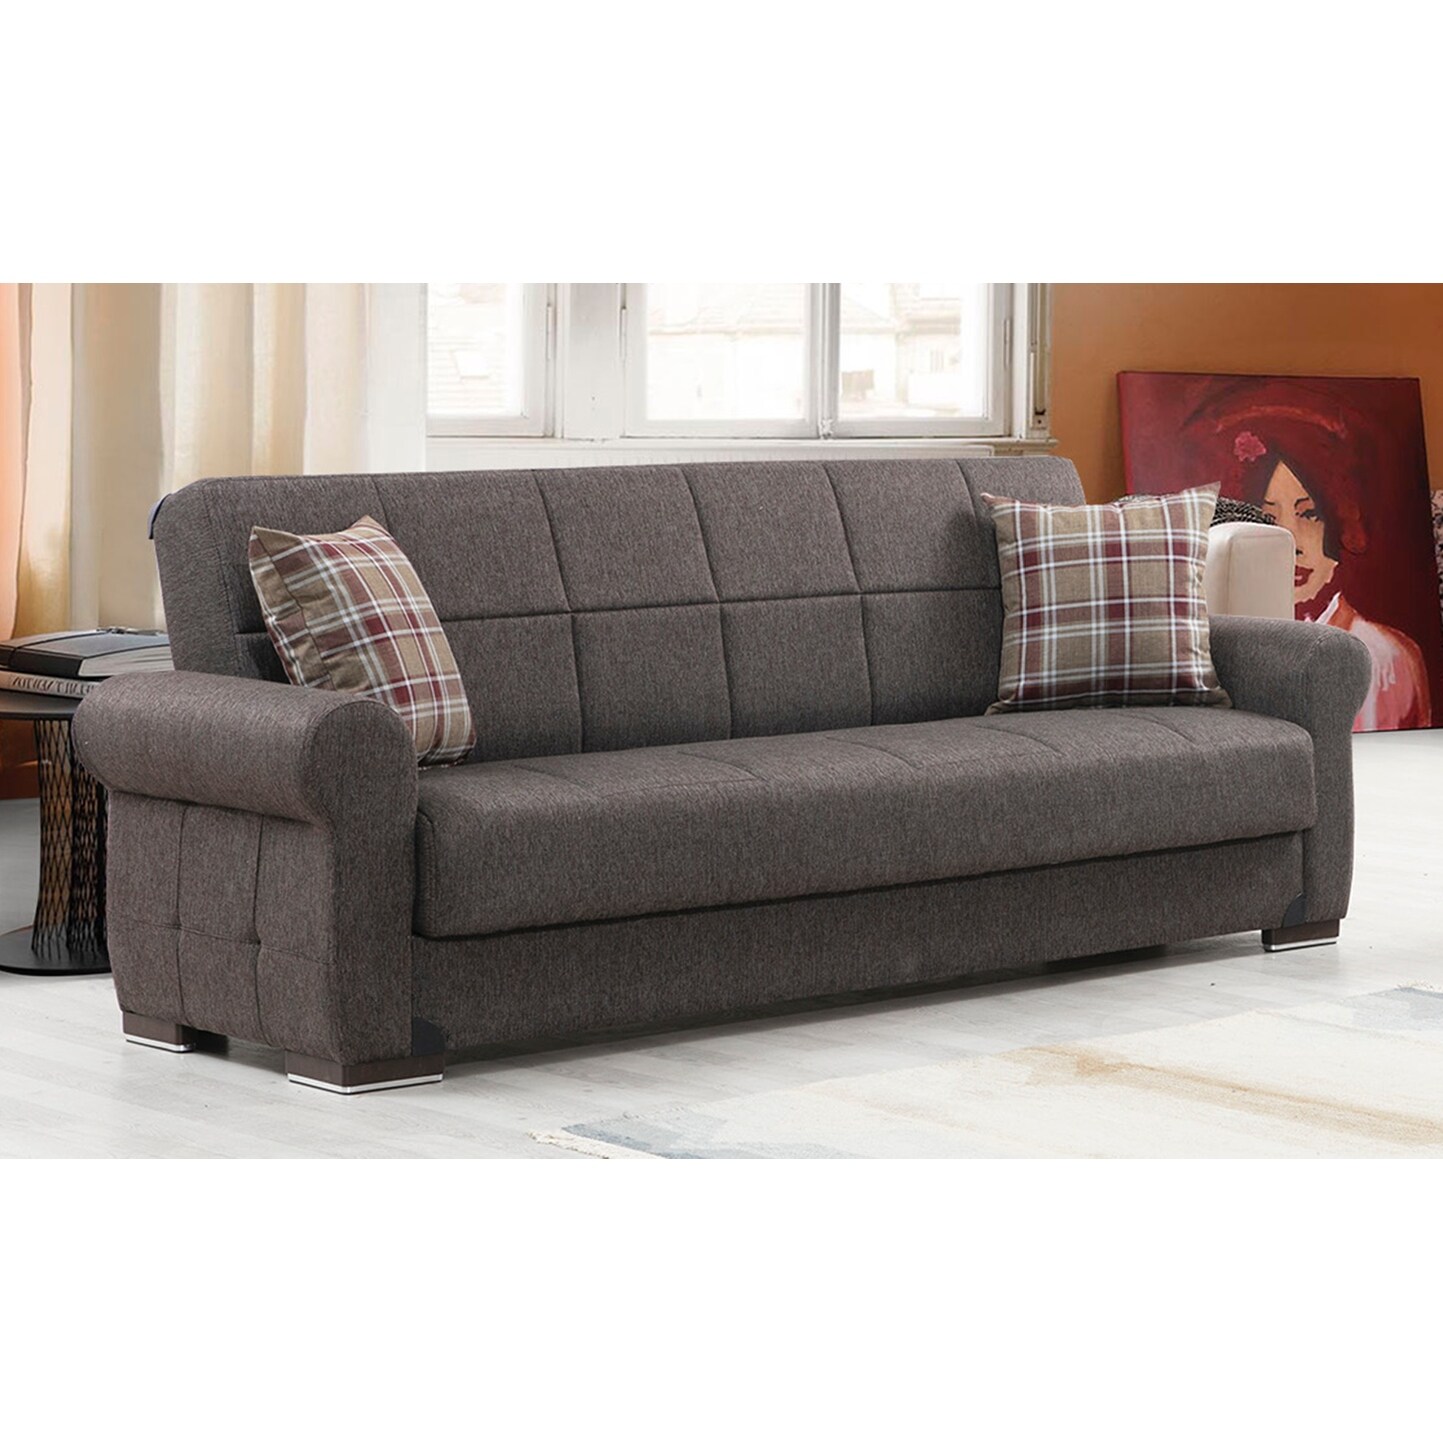 Sunrise Brown Fabric Upholstered Convertible Sleeper Sofa with Storage